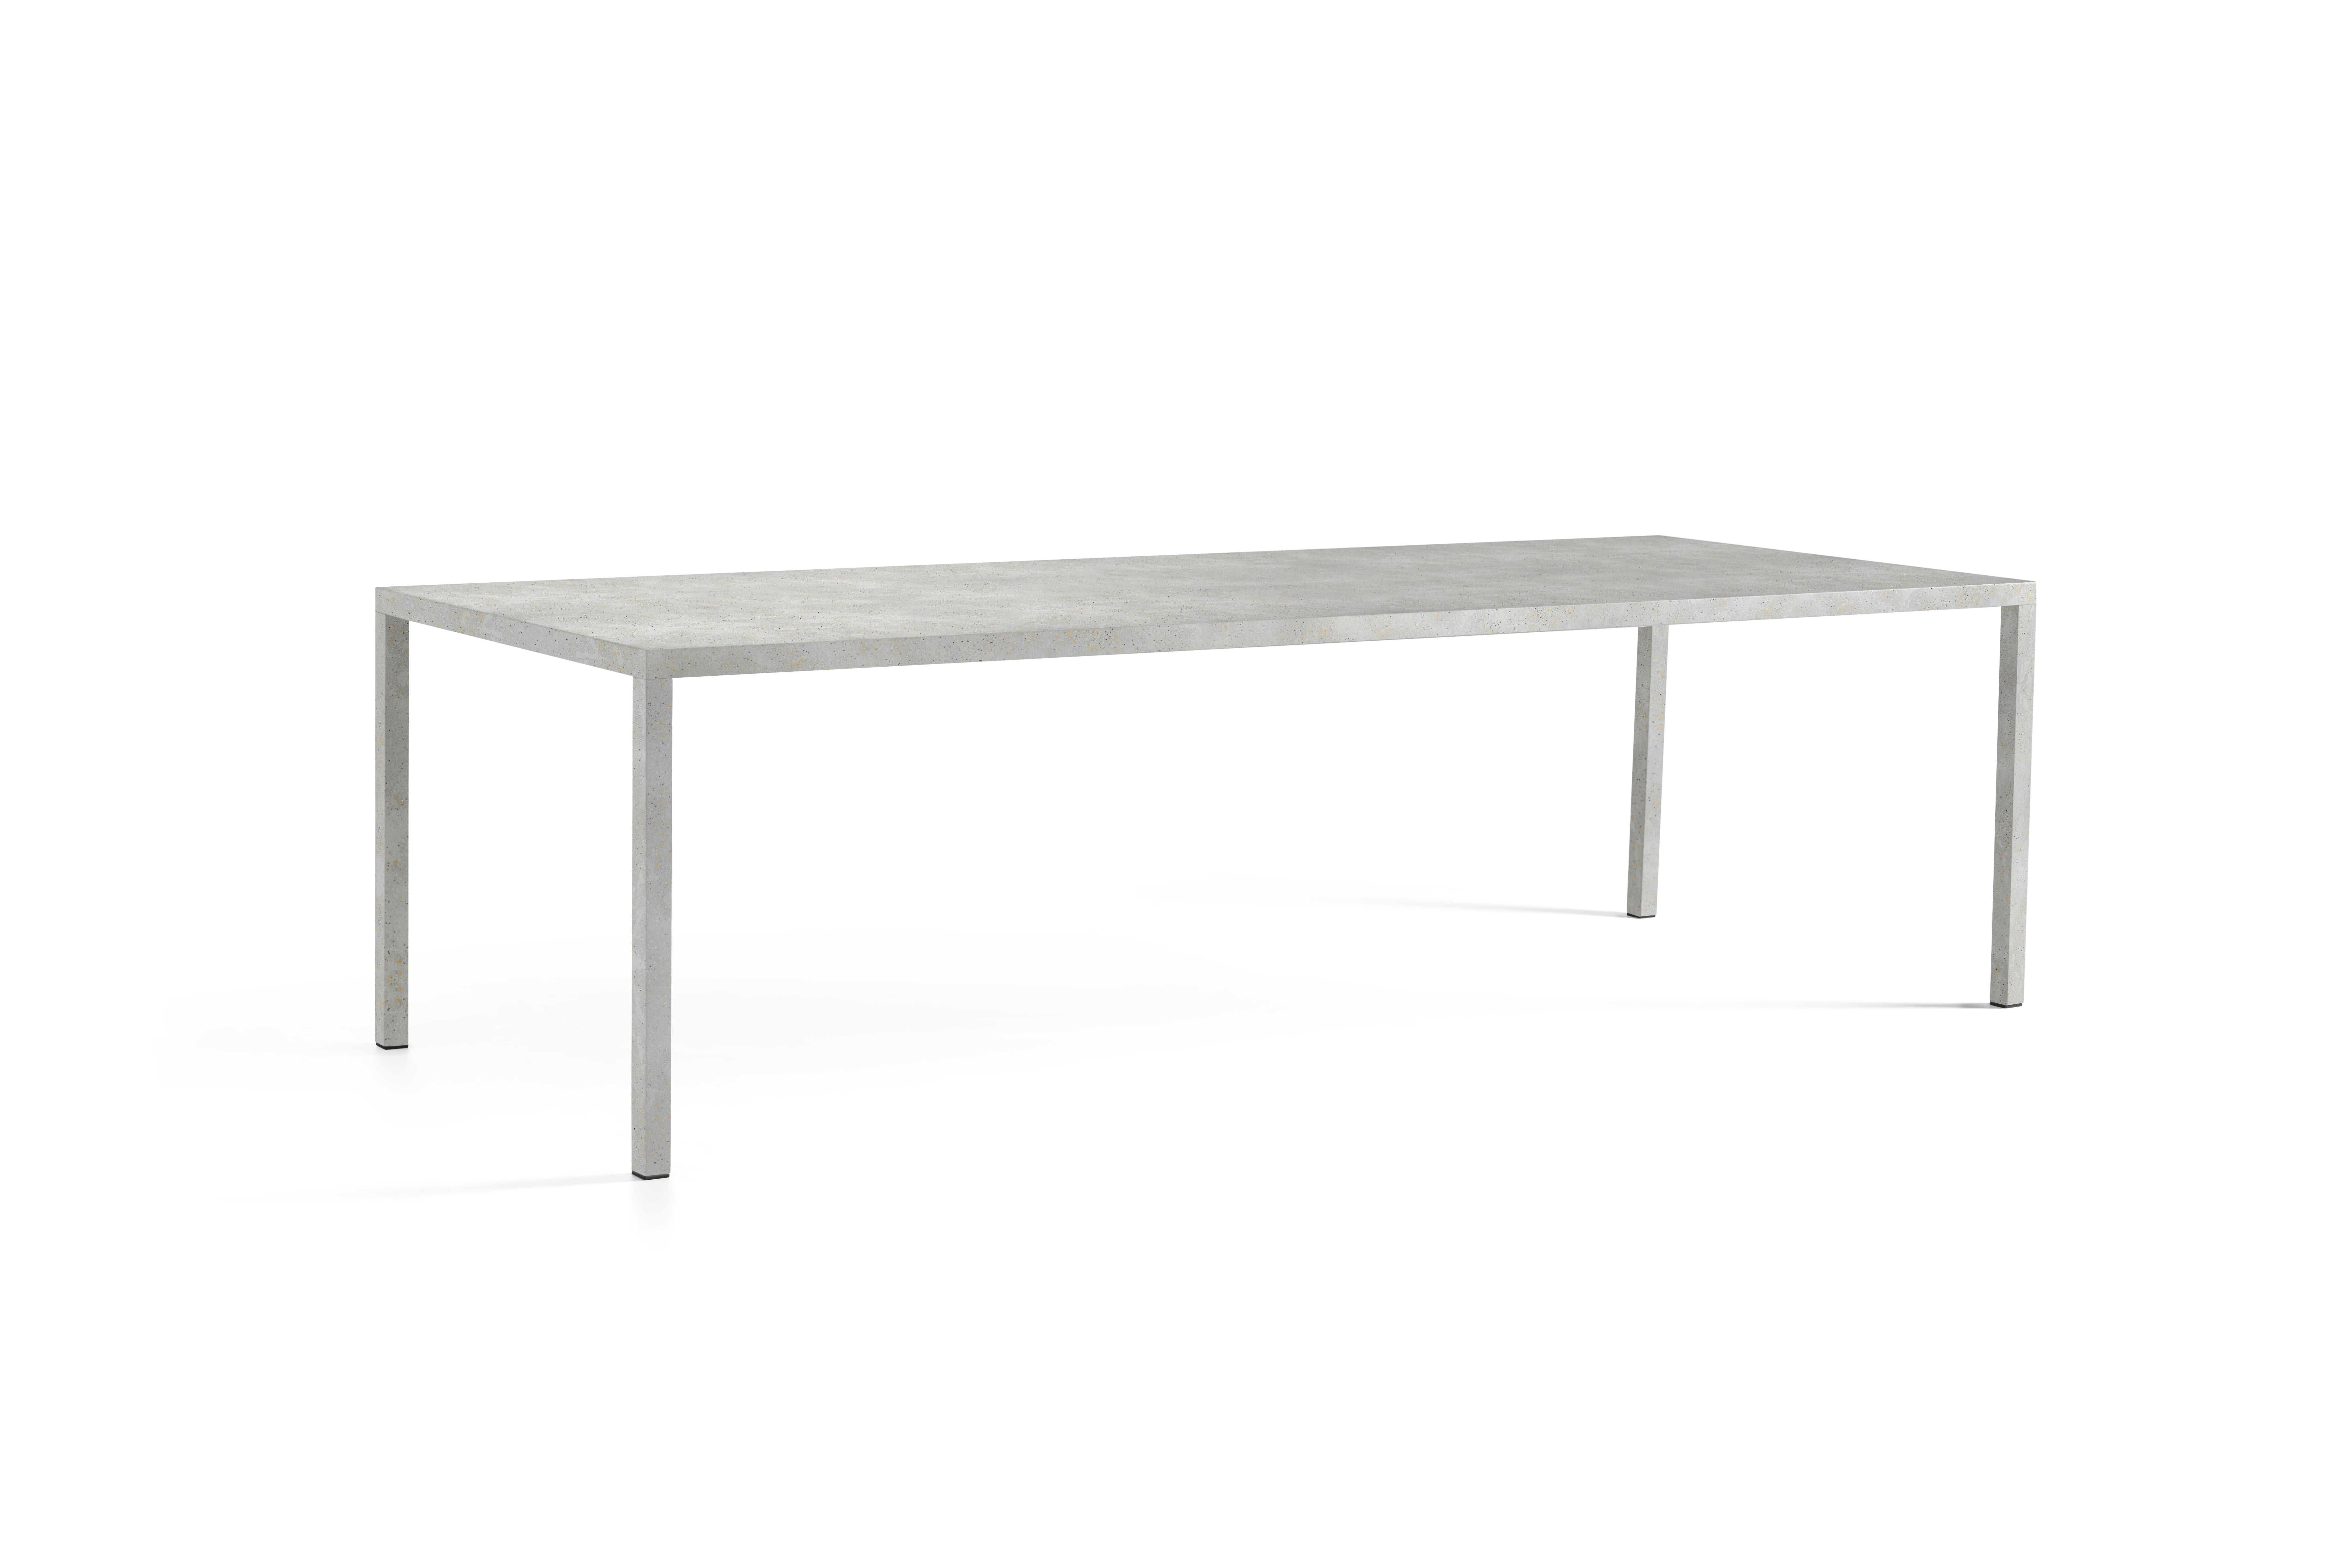 Table in 100% aluminum, a material that makes it lightweight and sustainable. For indoor and outdoor use. Available in four sizes and in the version with aluminum wheels that facilitate movement.
Matt finishes: textured cocciopesto, cocciobianco